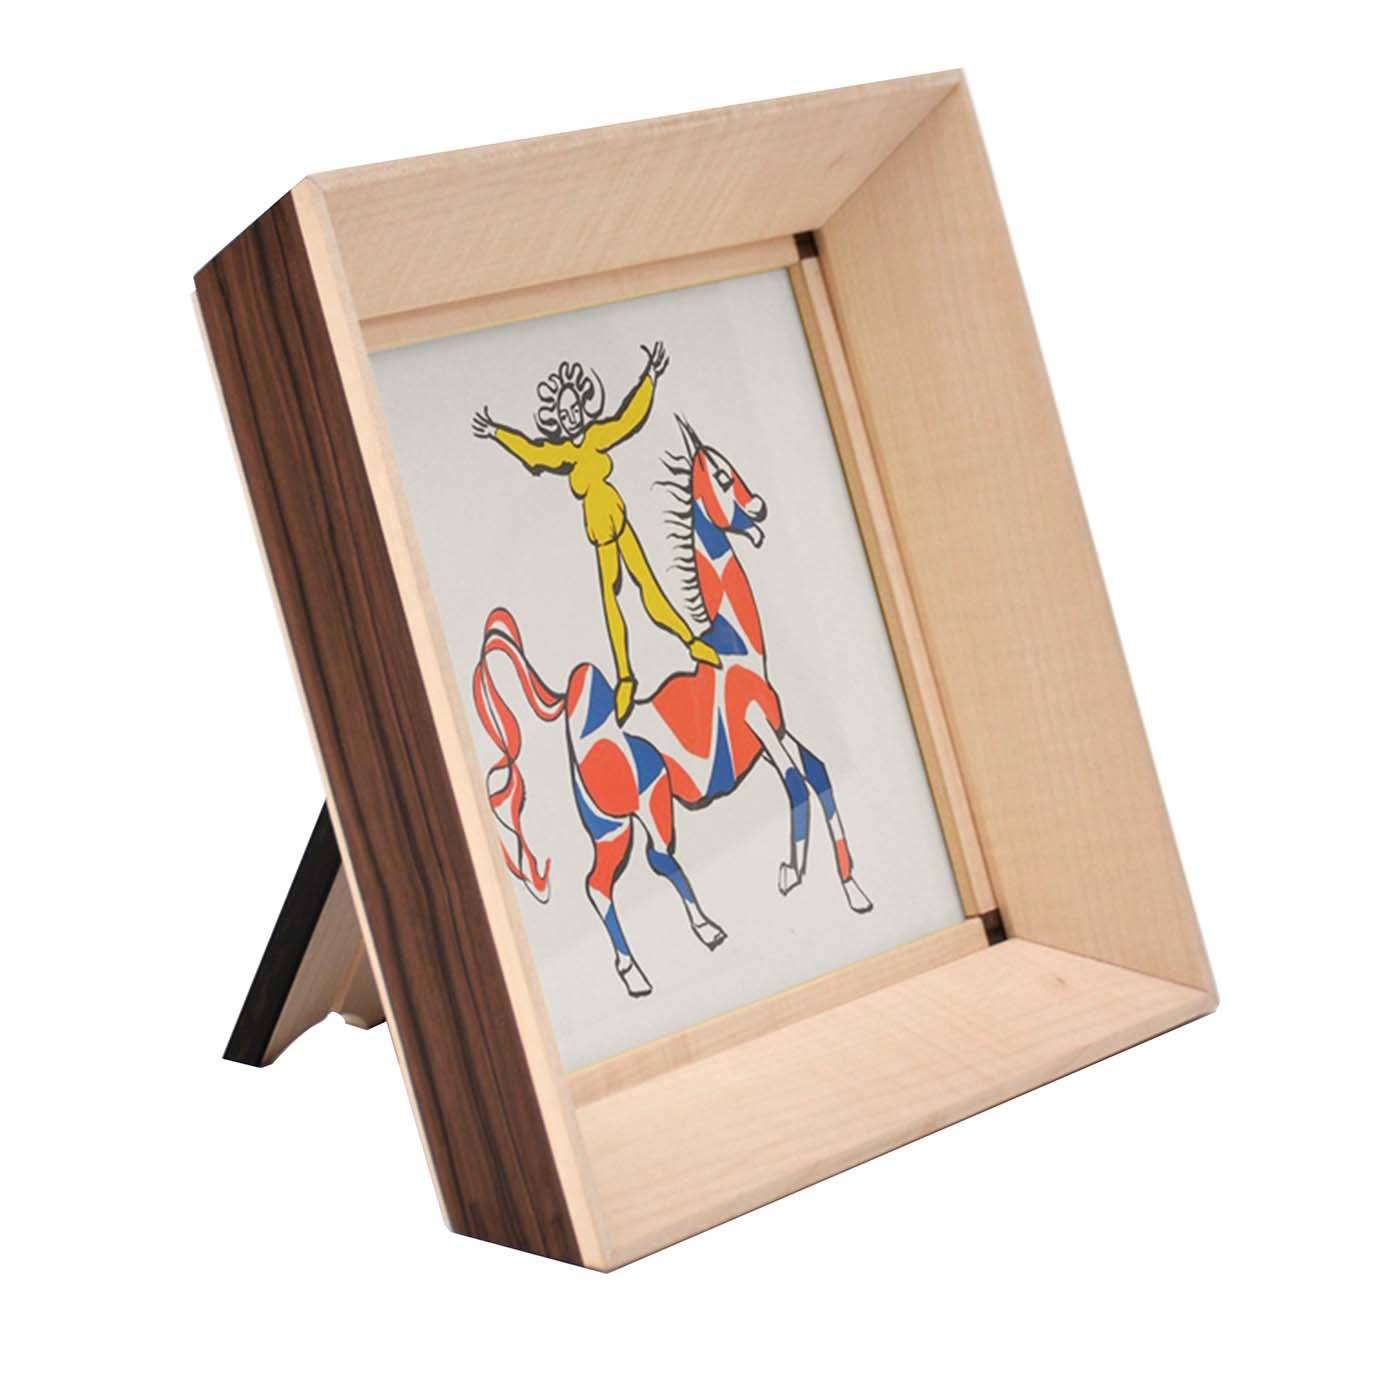 Canaletto Tabletop Picture Frame - Giordano Viganò